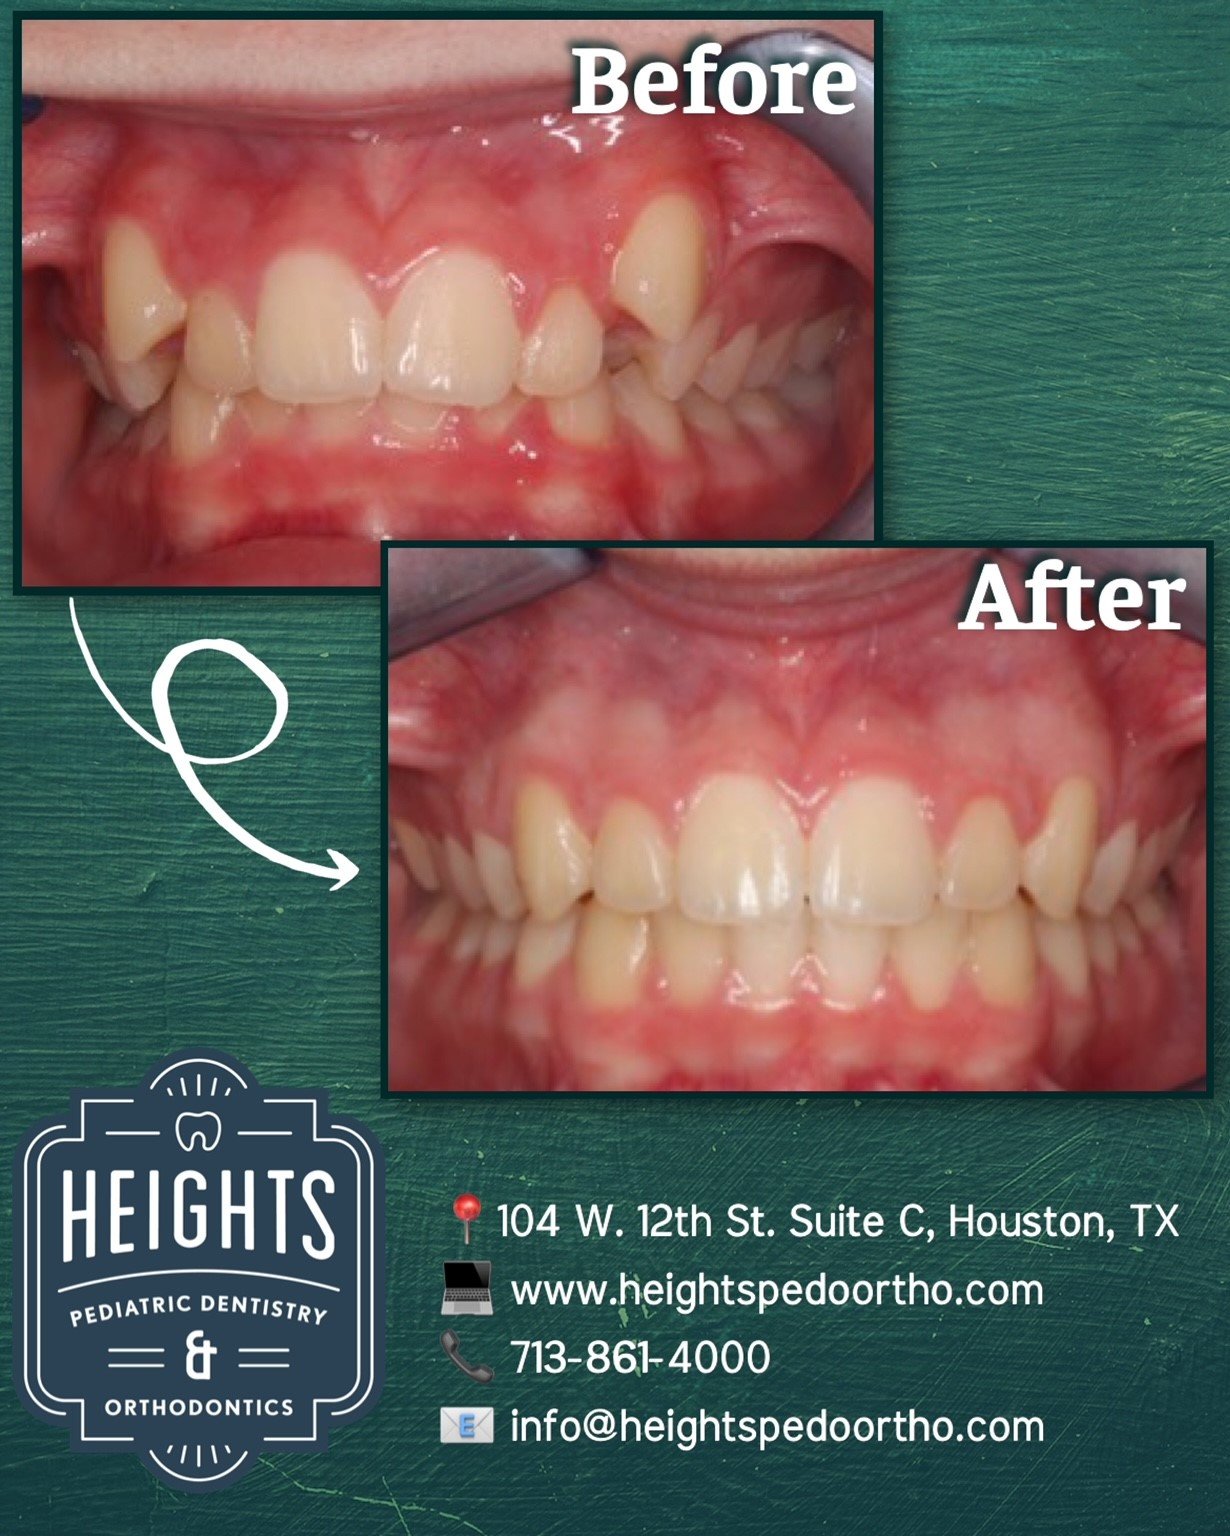 ✨BEFORE and AFTER ✨
This patient of ours presented with crowding and high displaced canines. With upper and lower braces, and a palatal expander, we accomplished this beautiful straight smile!

#heightspedoortho #braces #weloveourpatients #heightshou